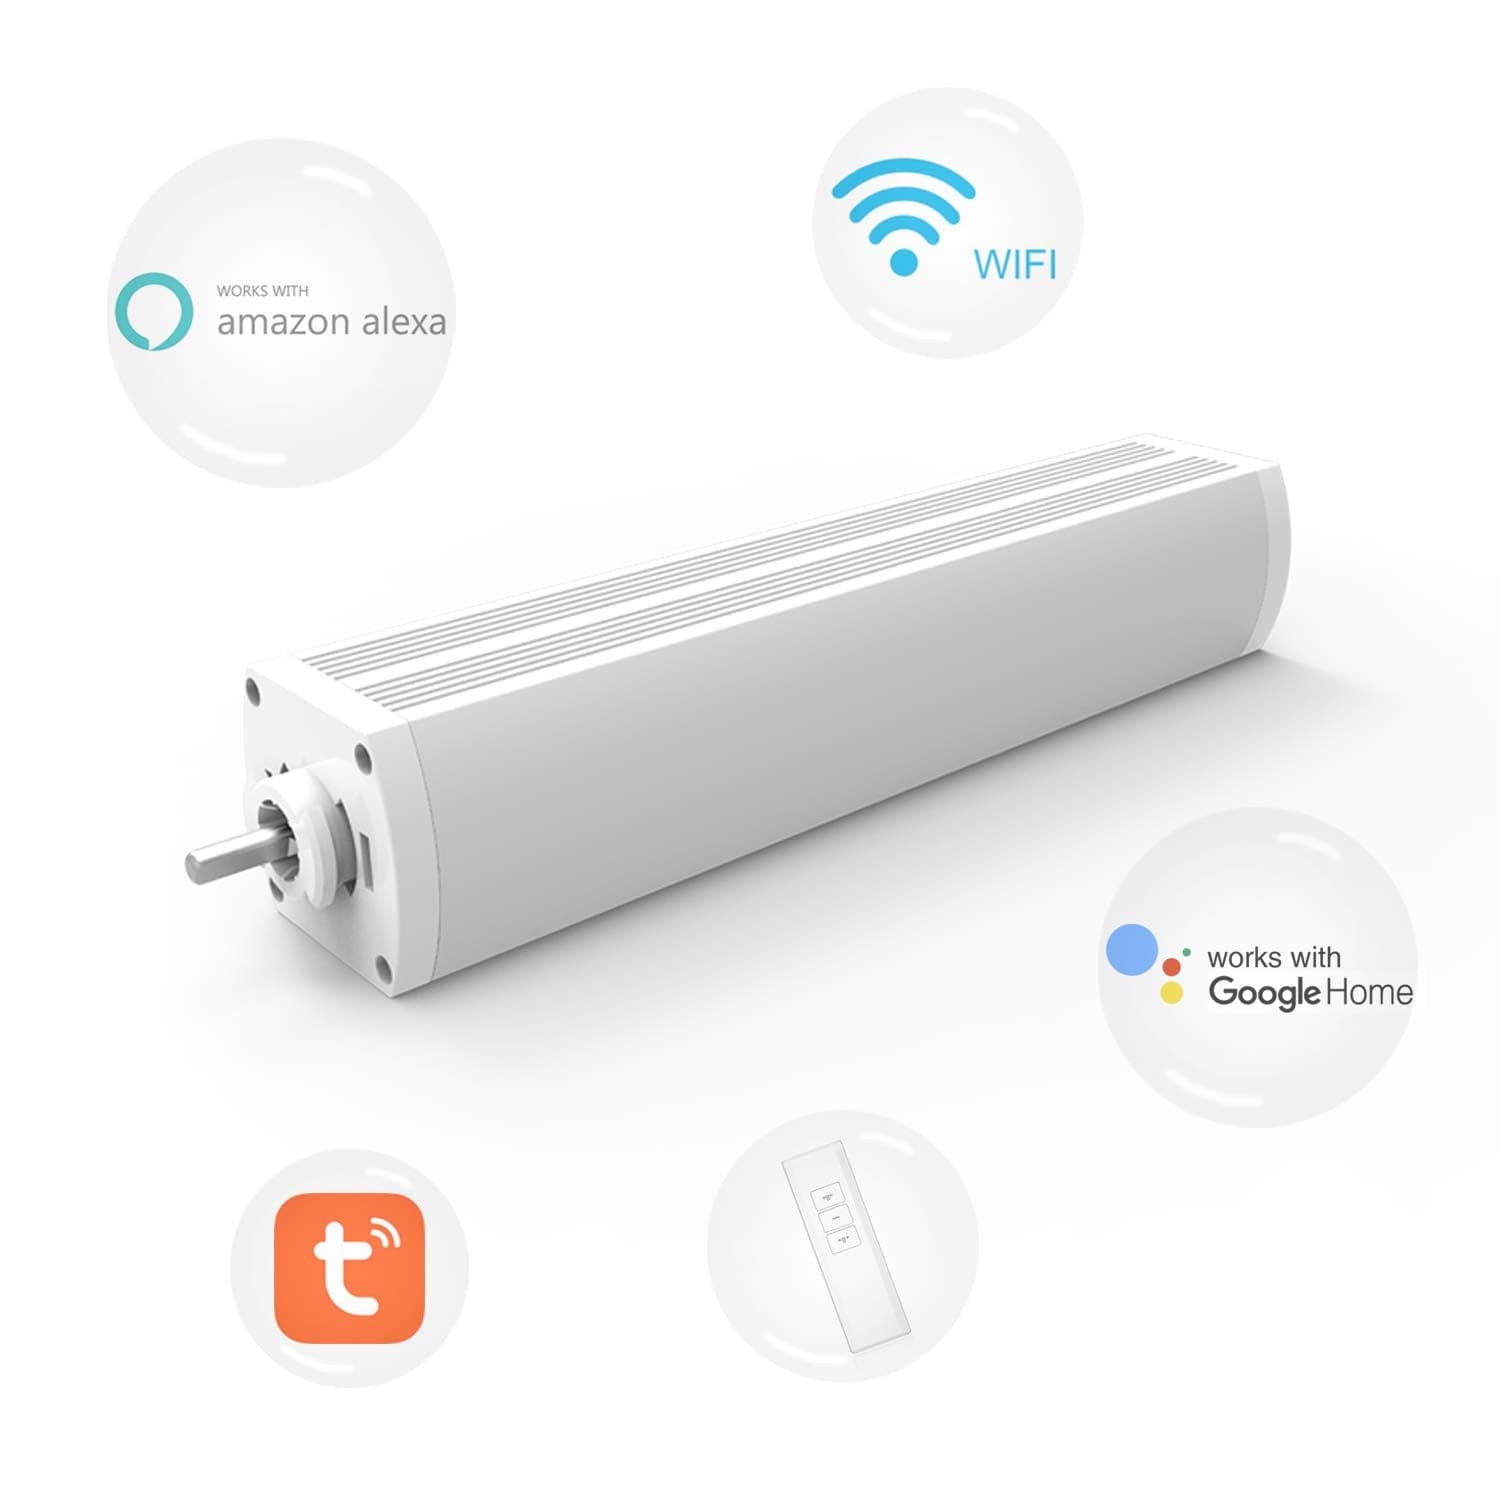 Smart Wi-Fi PIR Motion Detector | Supply Master | Accra, Ghana Smart Home Buy Tools hardware Building materials